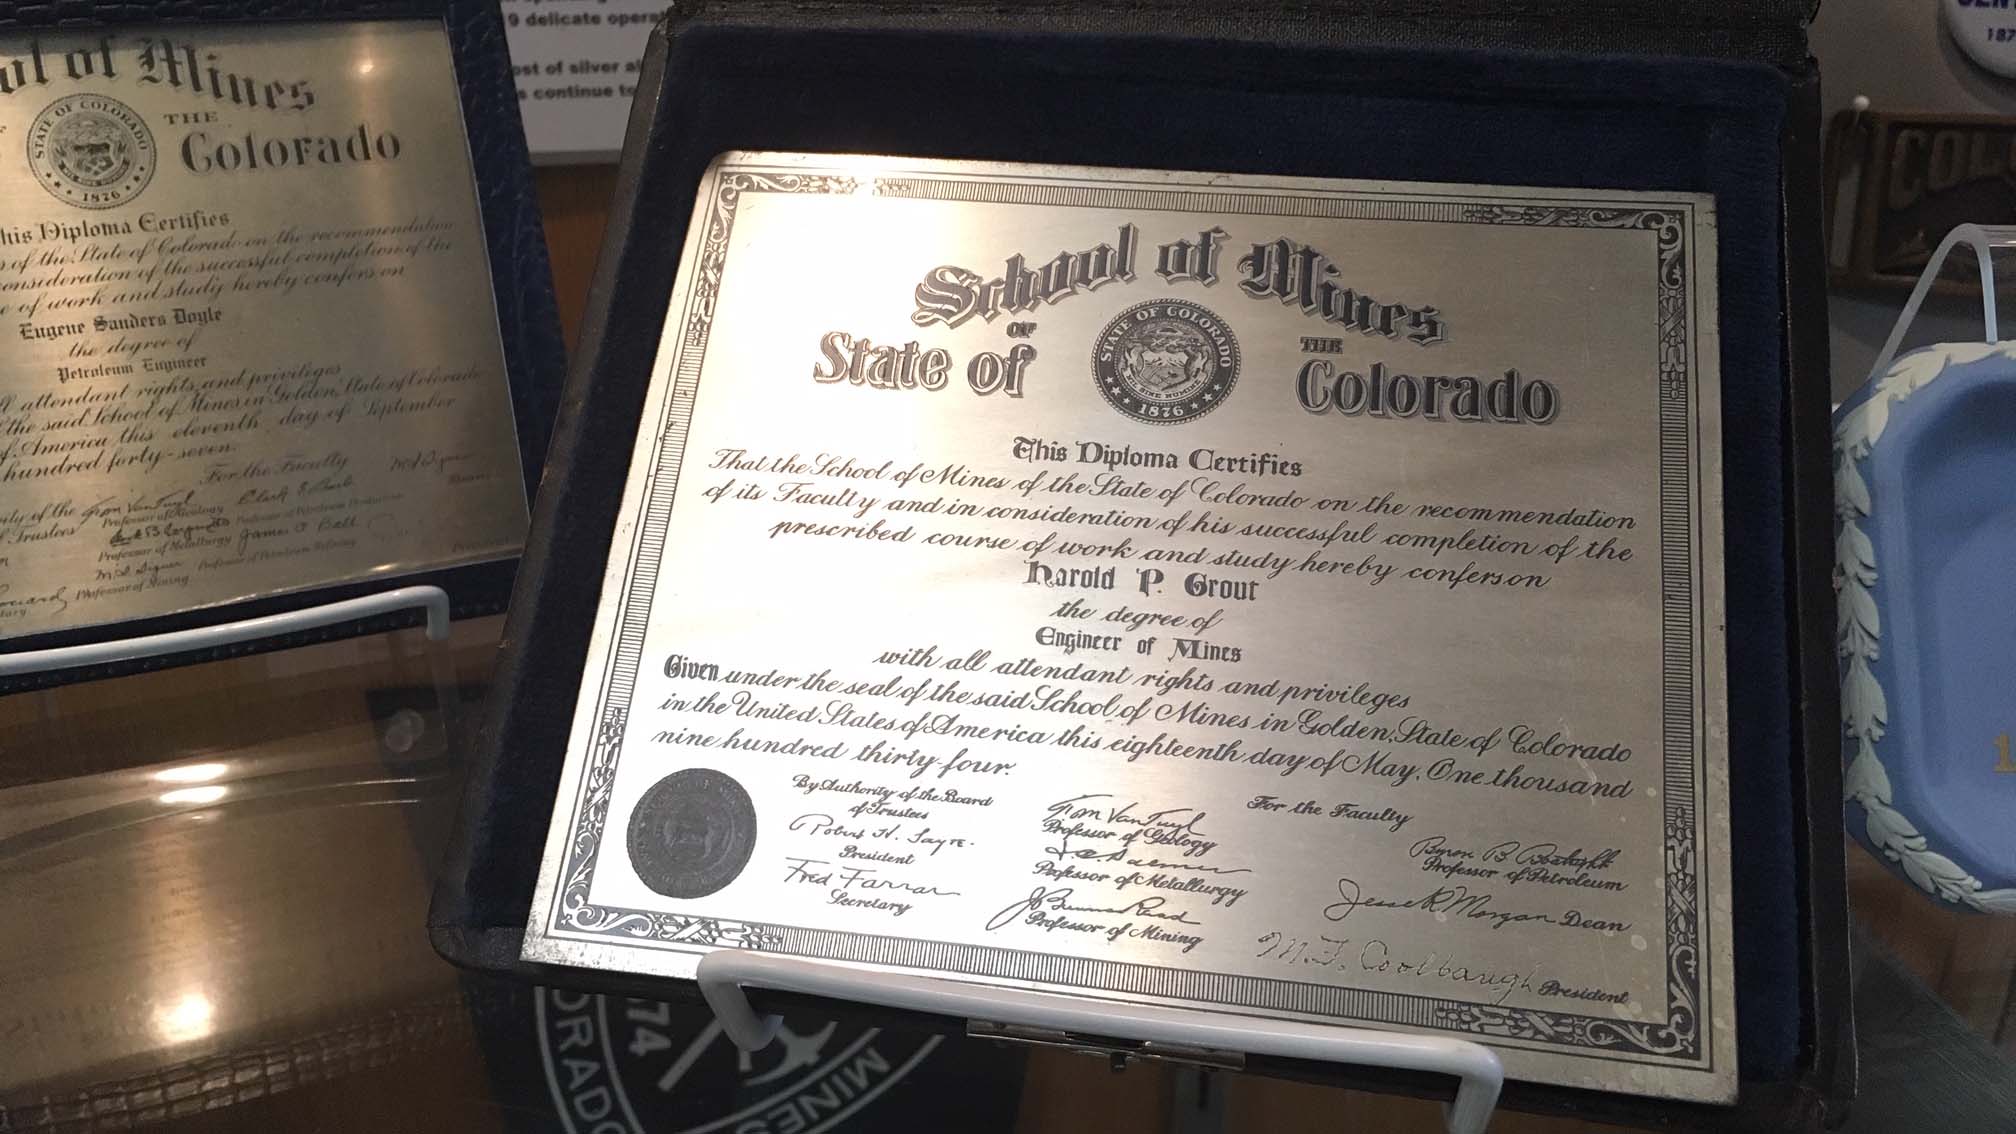   of Mines Silver Plated Diploma